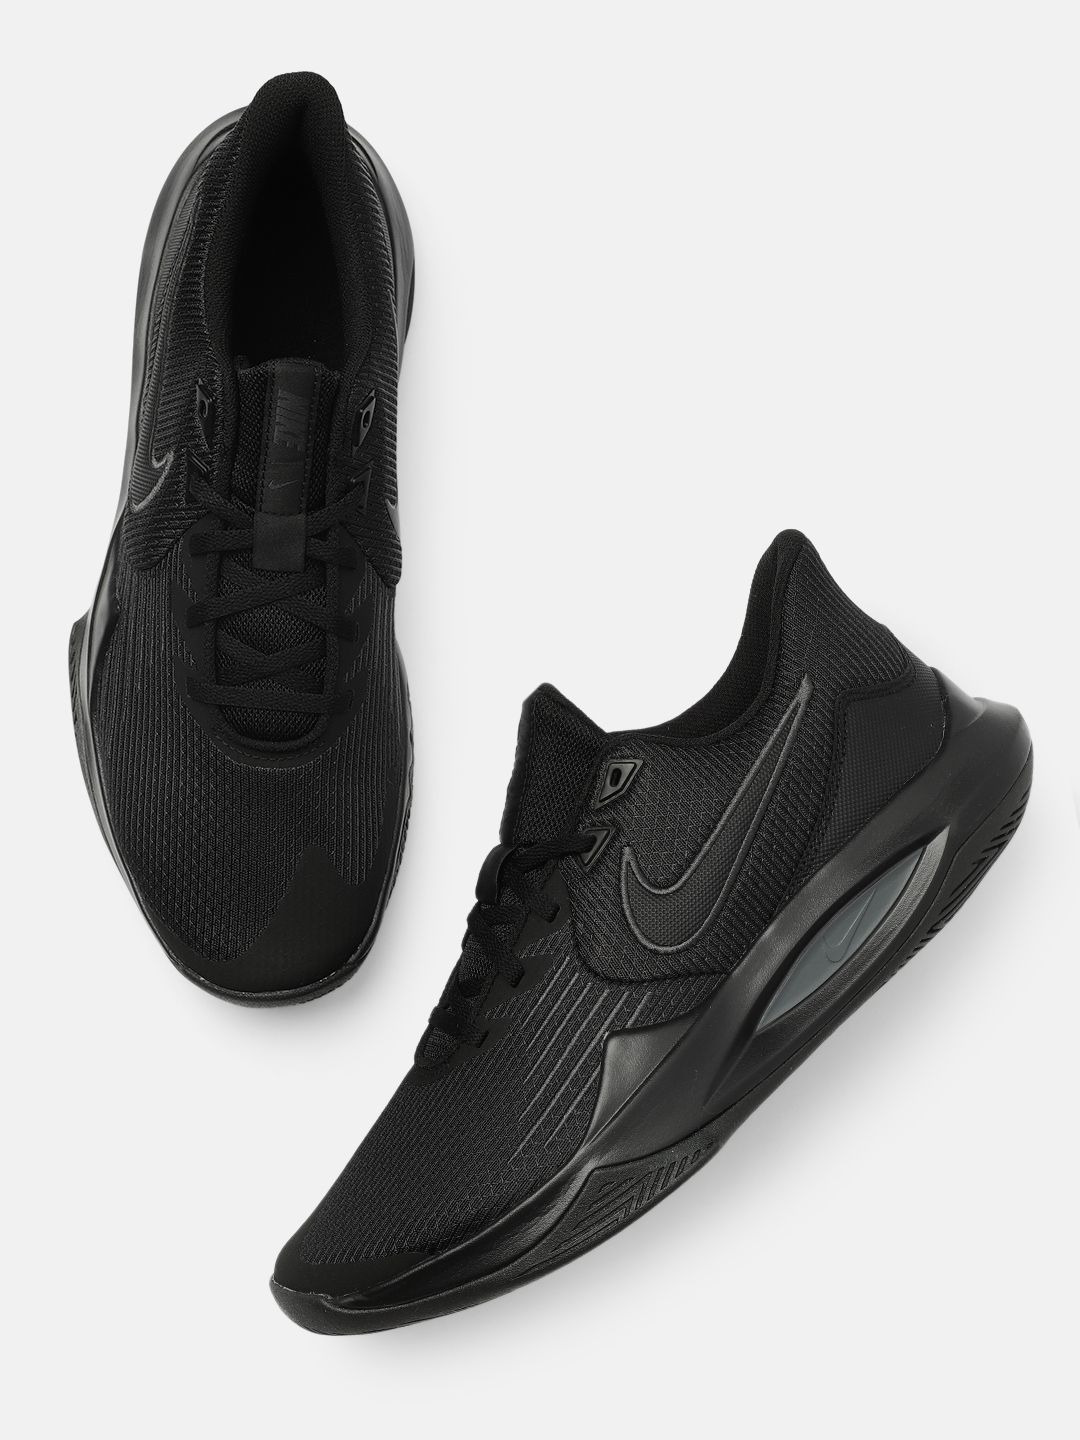 Nike Unisex Black Precision V Basketball Shoes Price in India